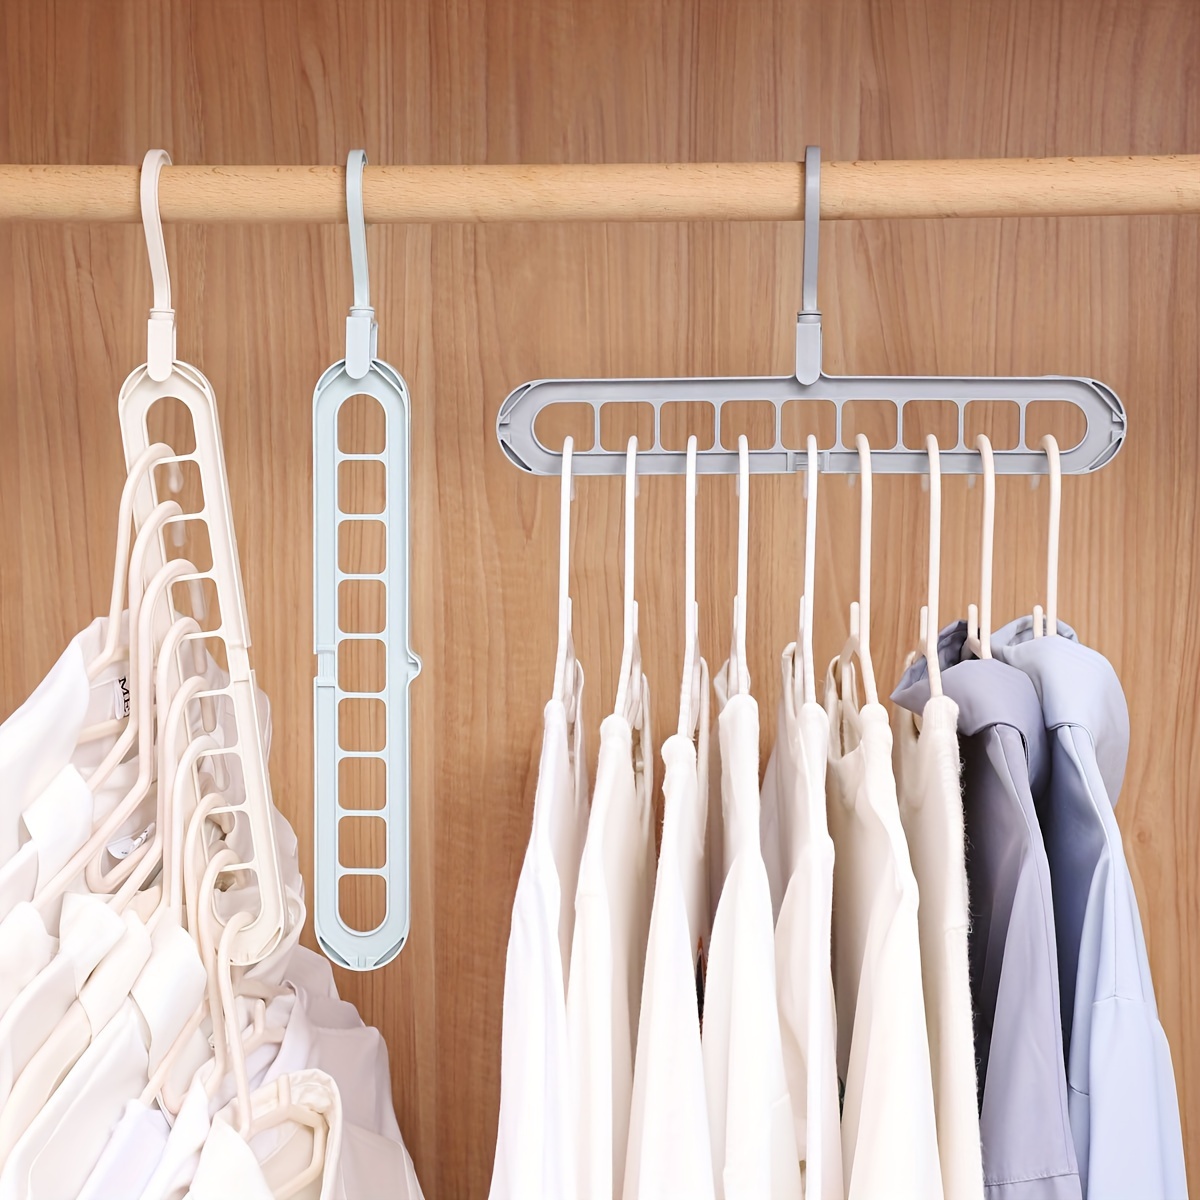 Clothes Hangers for Space Saving Wardrobe Organizer Clothes Rack 9 Slots  Design for Heavy Clothes Shirts Pants Dresses Coats